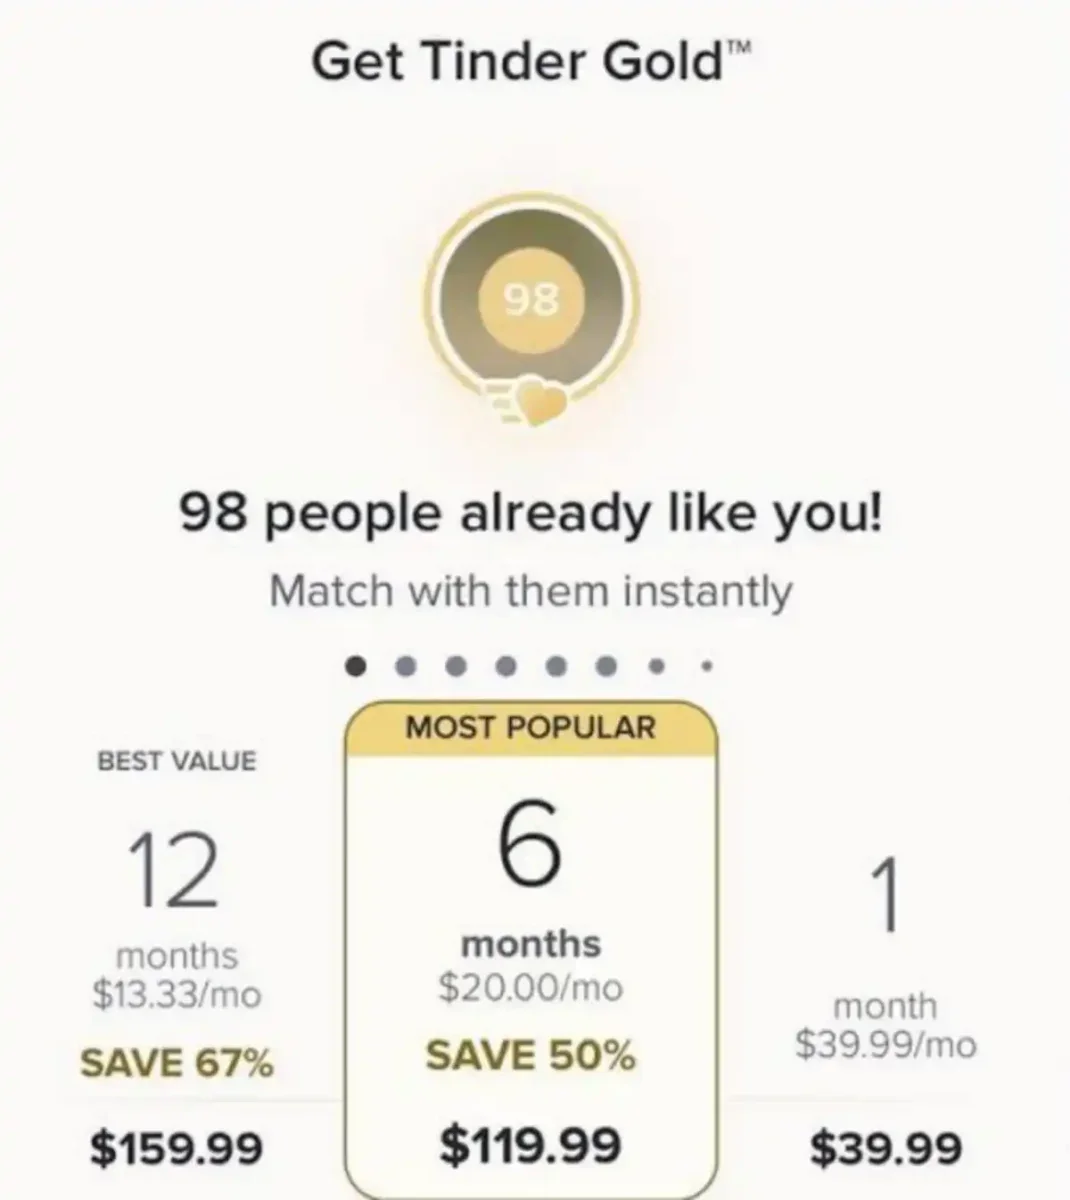 How to get Tinder Gold for free